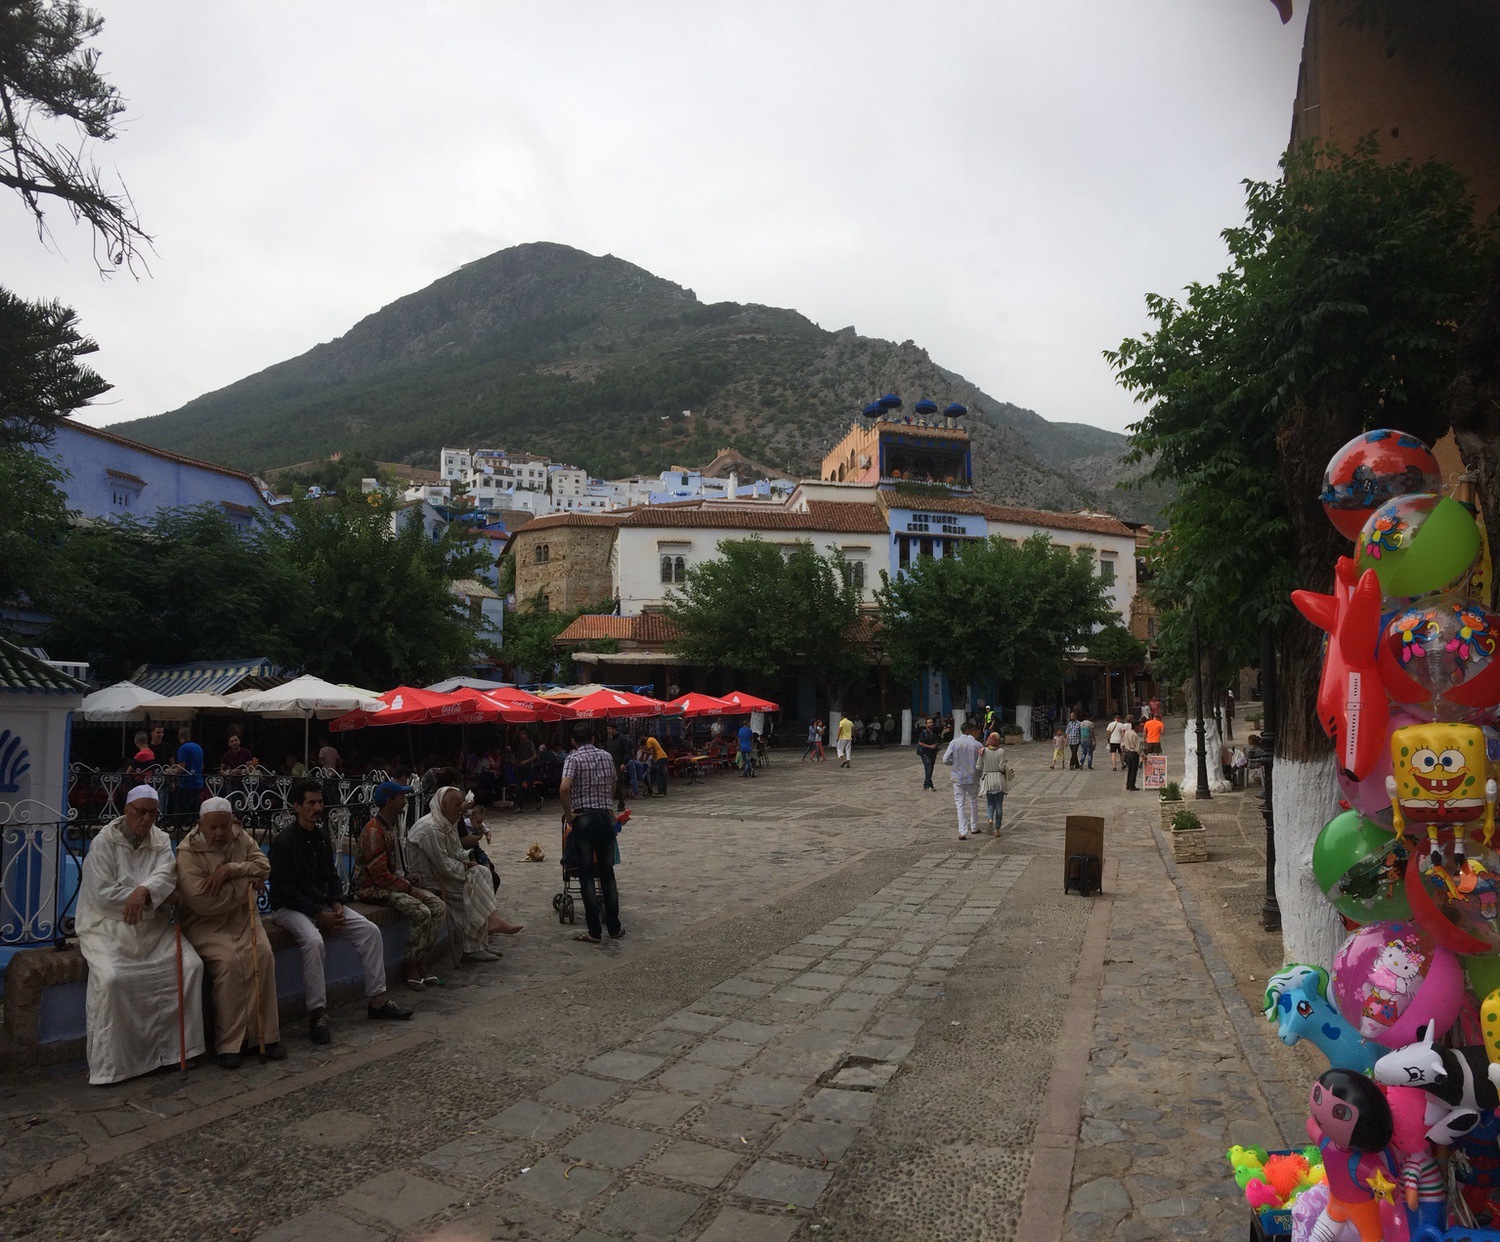 View from the square toward a mountain